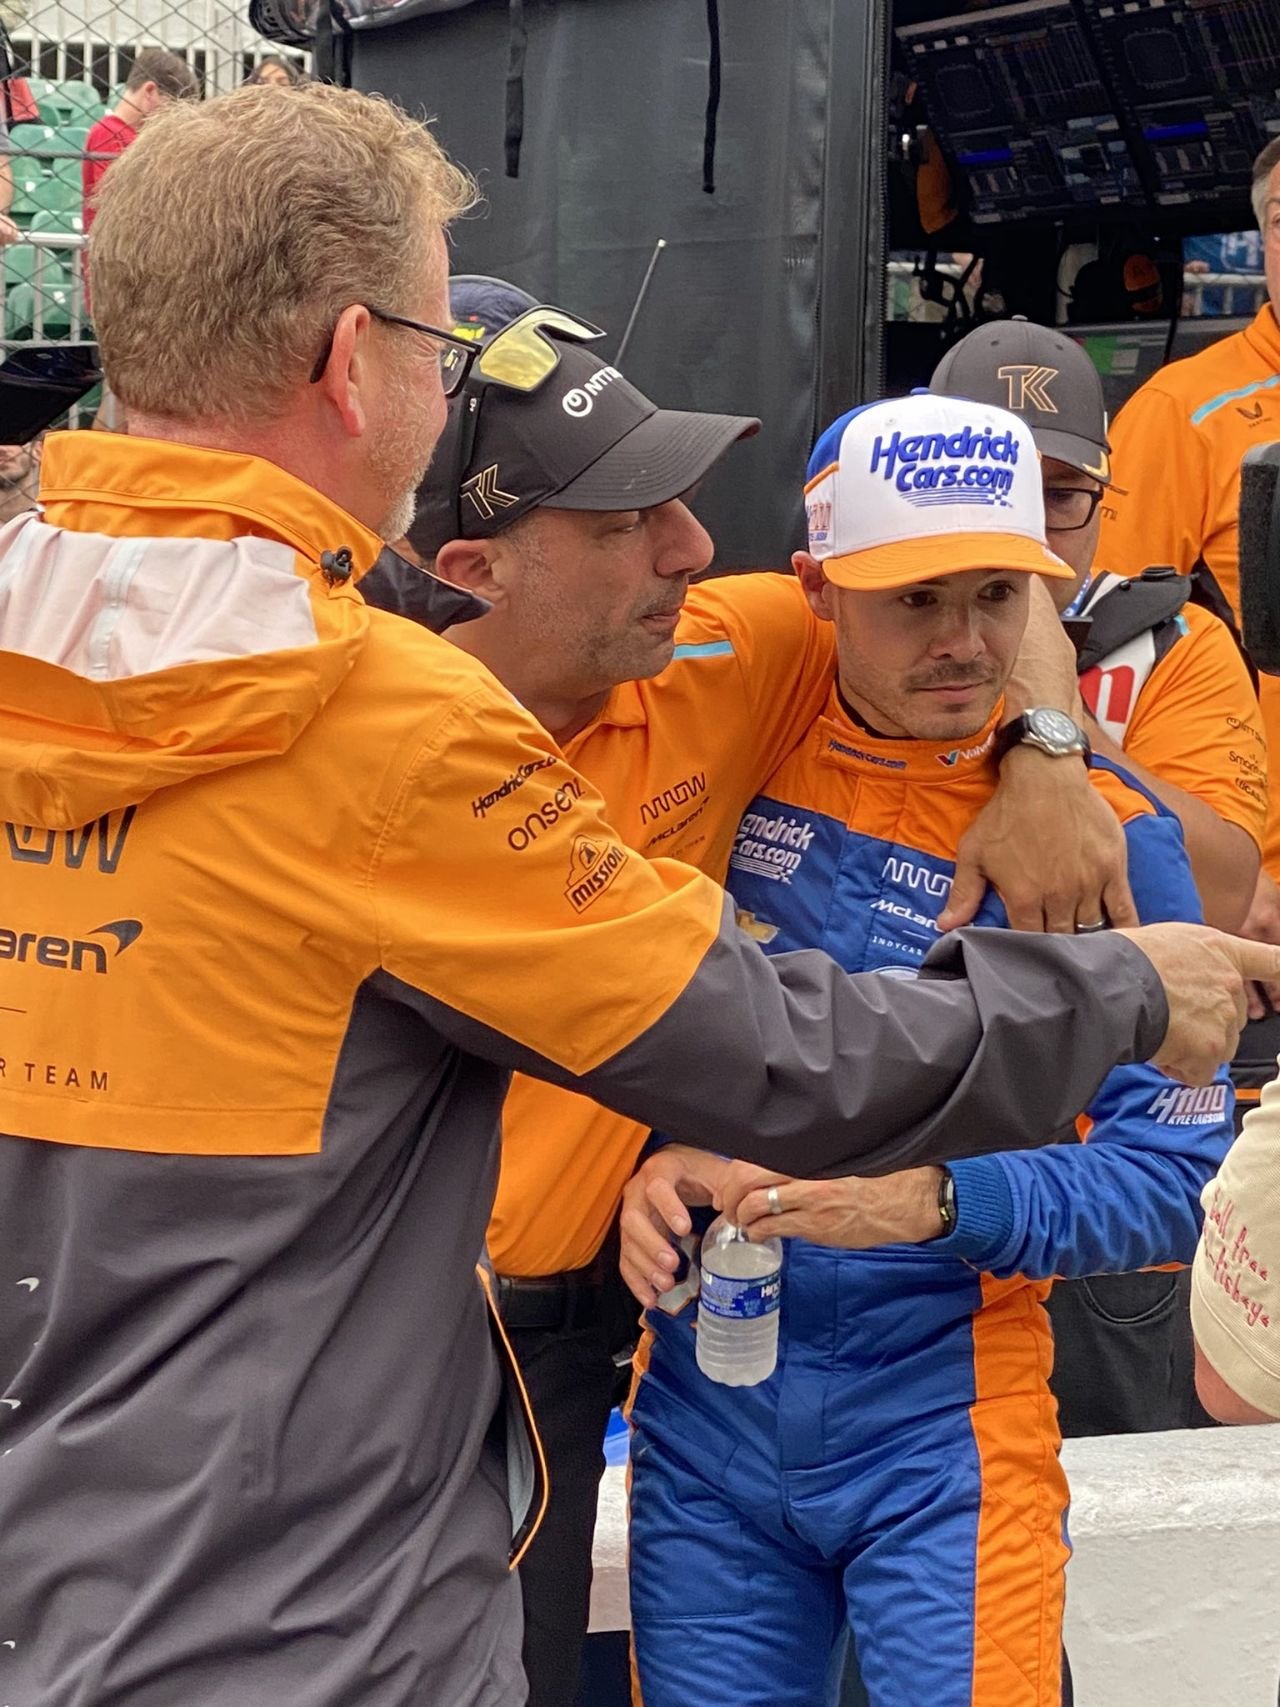 Tony Kanaan trying to make Kyle Larson feel better after a speeding penalty derails his day. He’ll try again next year.